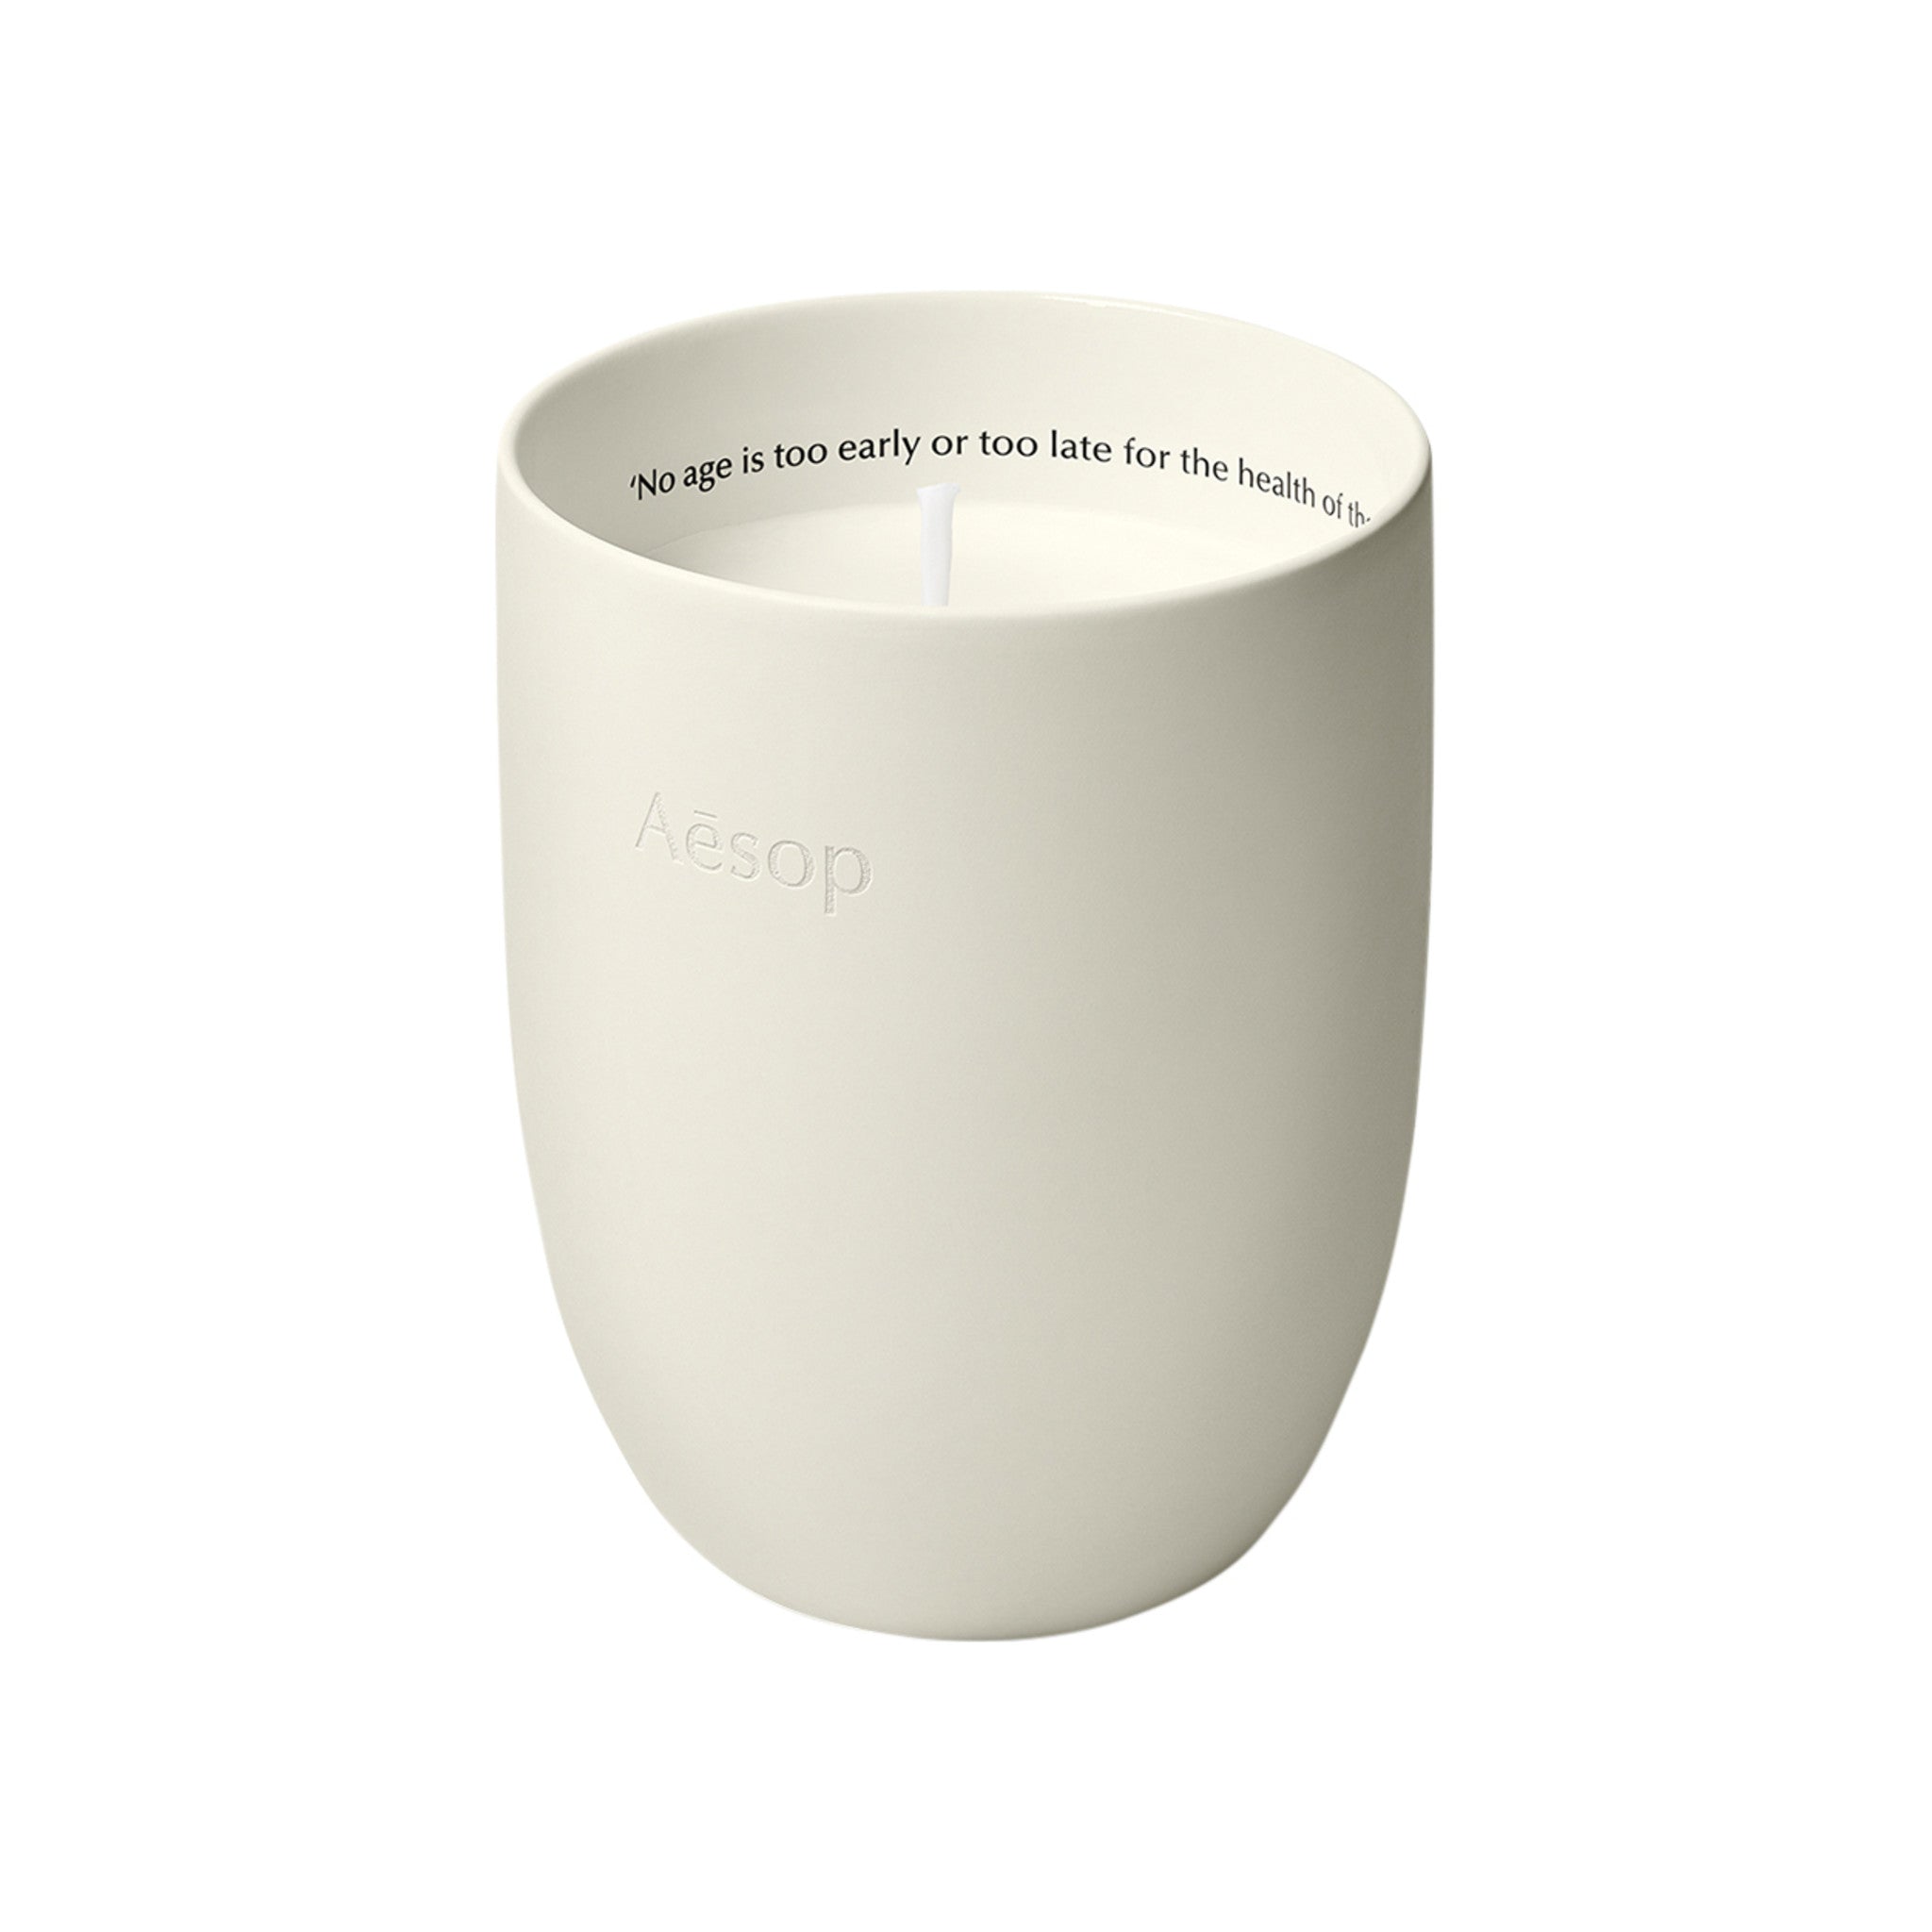 Aesop Ptolemy Candle main image.